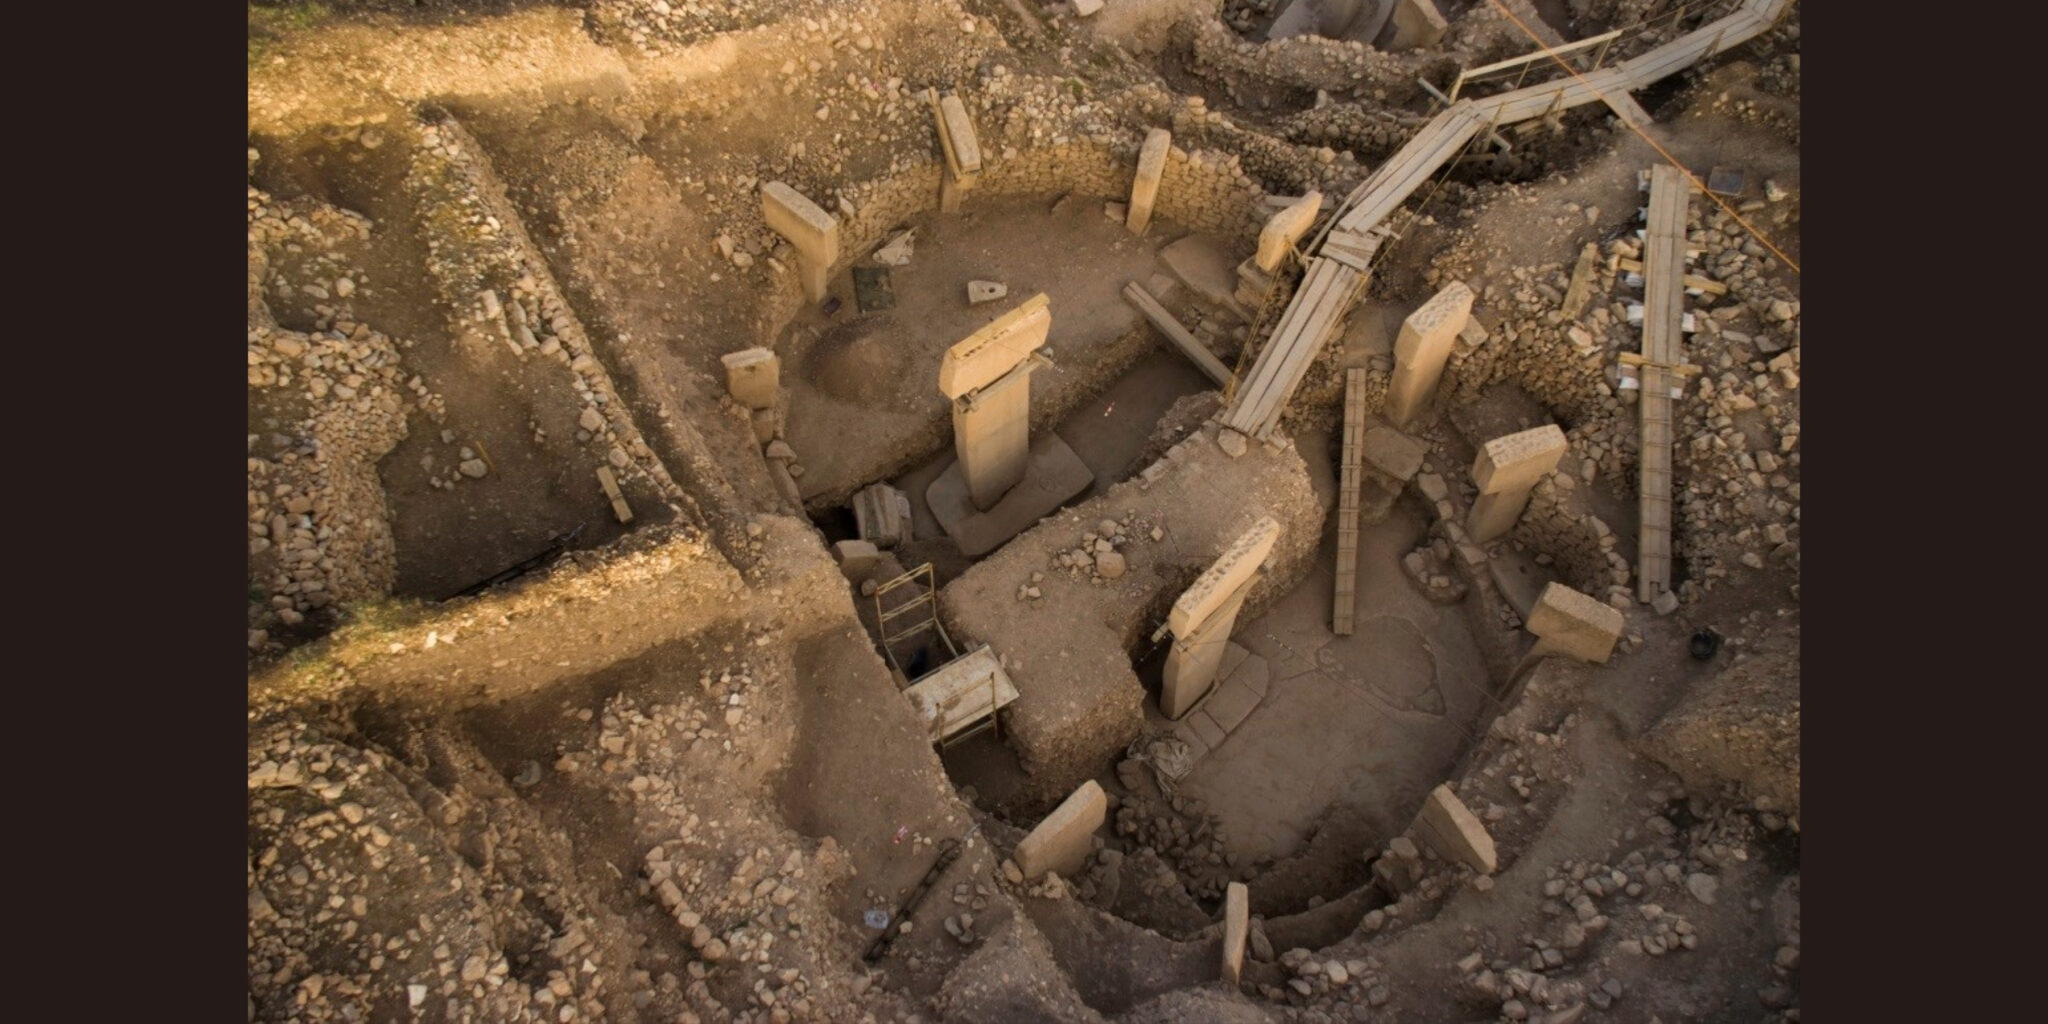 Of Monuments and Men: Exploring the 11,500 year old world of Göbekli Tepe